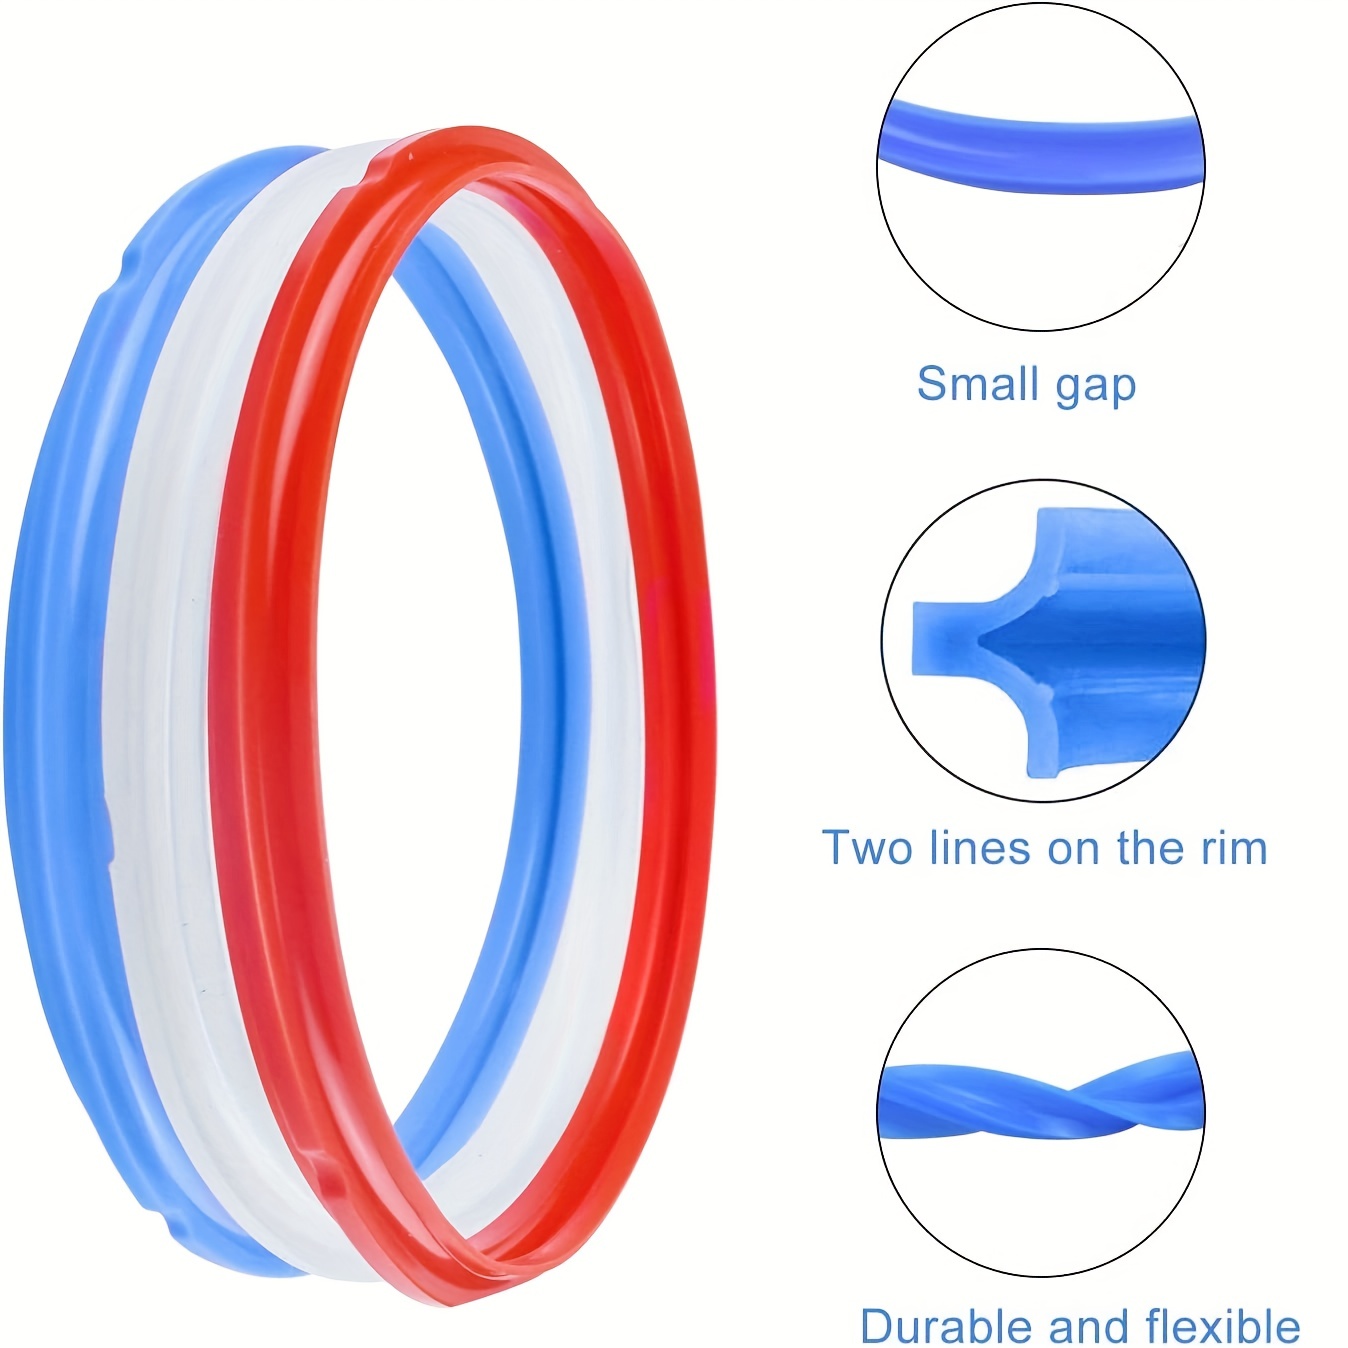  Sealing Rings for Instant Pot Accessories of 6 Qt Models - Red,  Blue and Clear, Sweet and Savory Edition - 3 Pack BPA-Free Food-grade  Replacement Silicone Seal Gaskets for Instpot 6